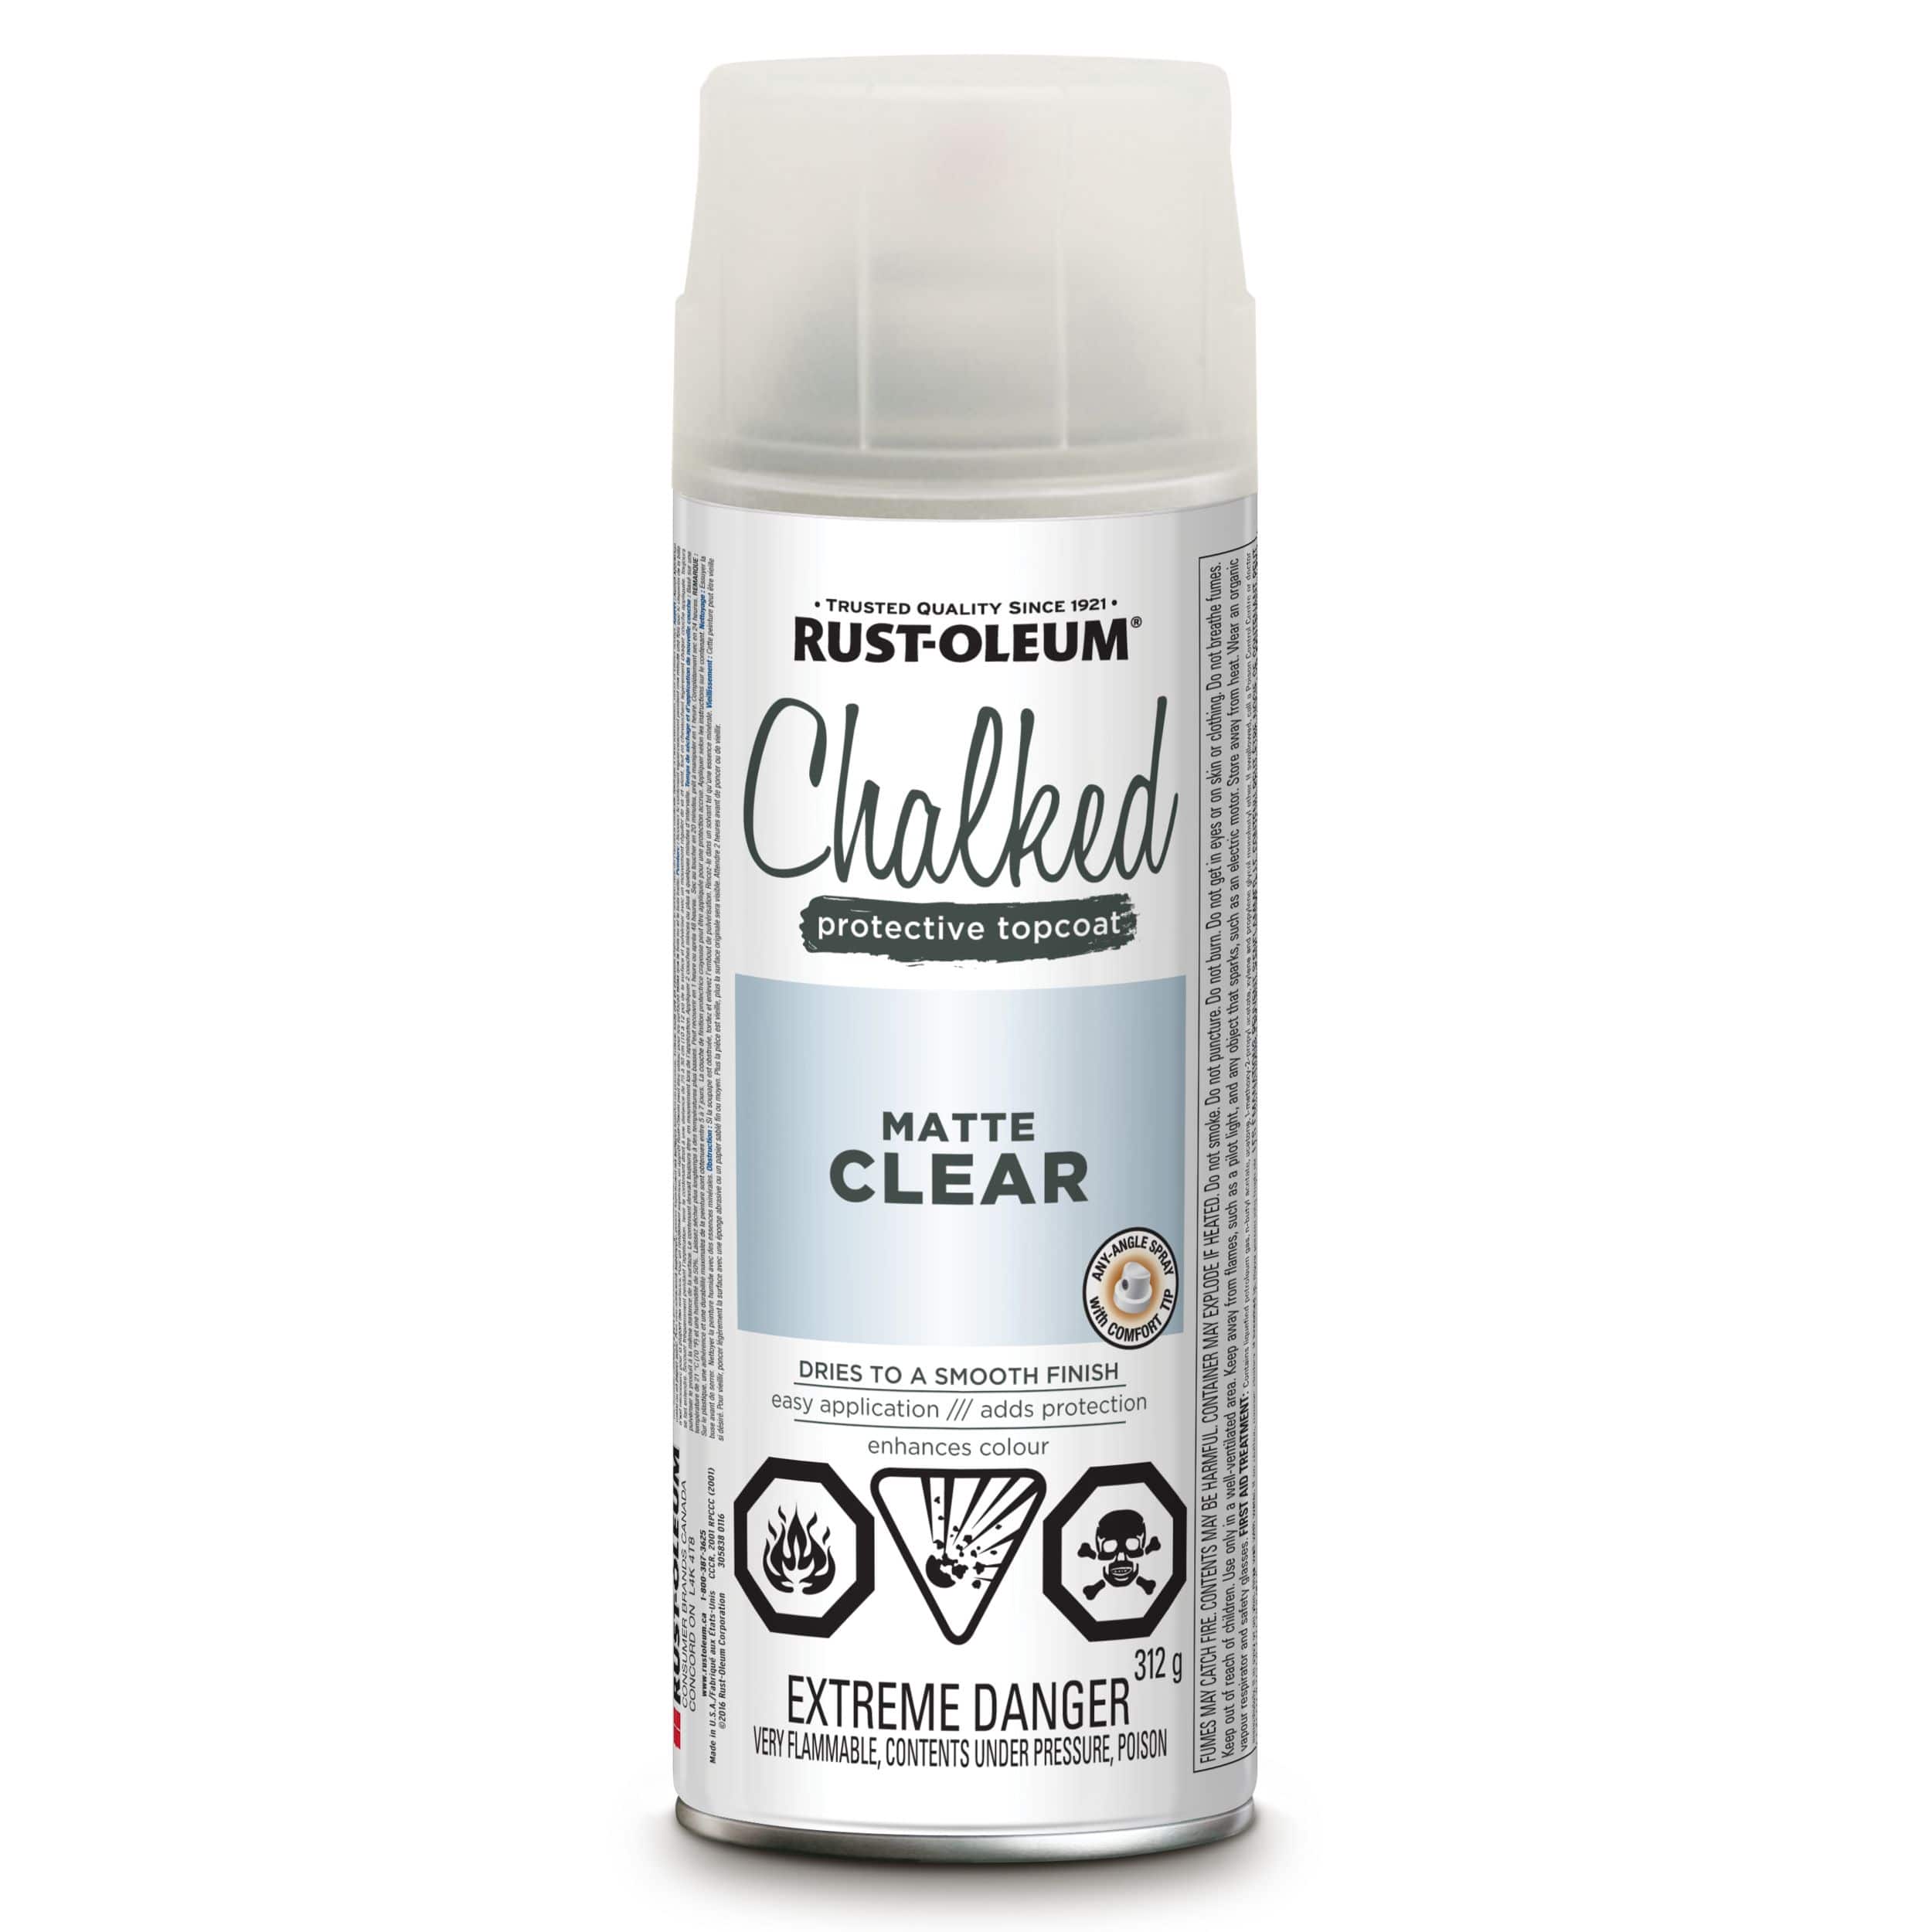 Rust-Oleum Chalked Protective Topcoat Spray Paint, Matte Clear, 312-g